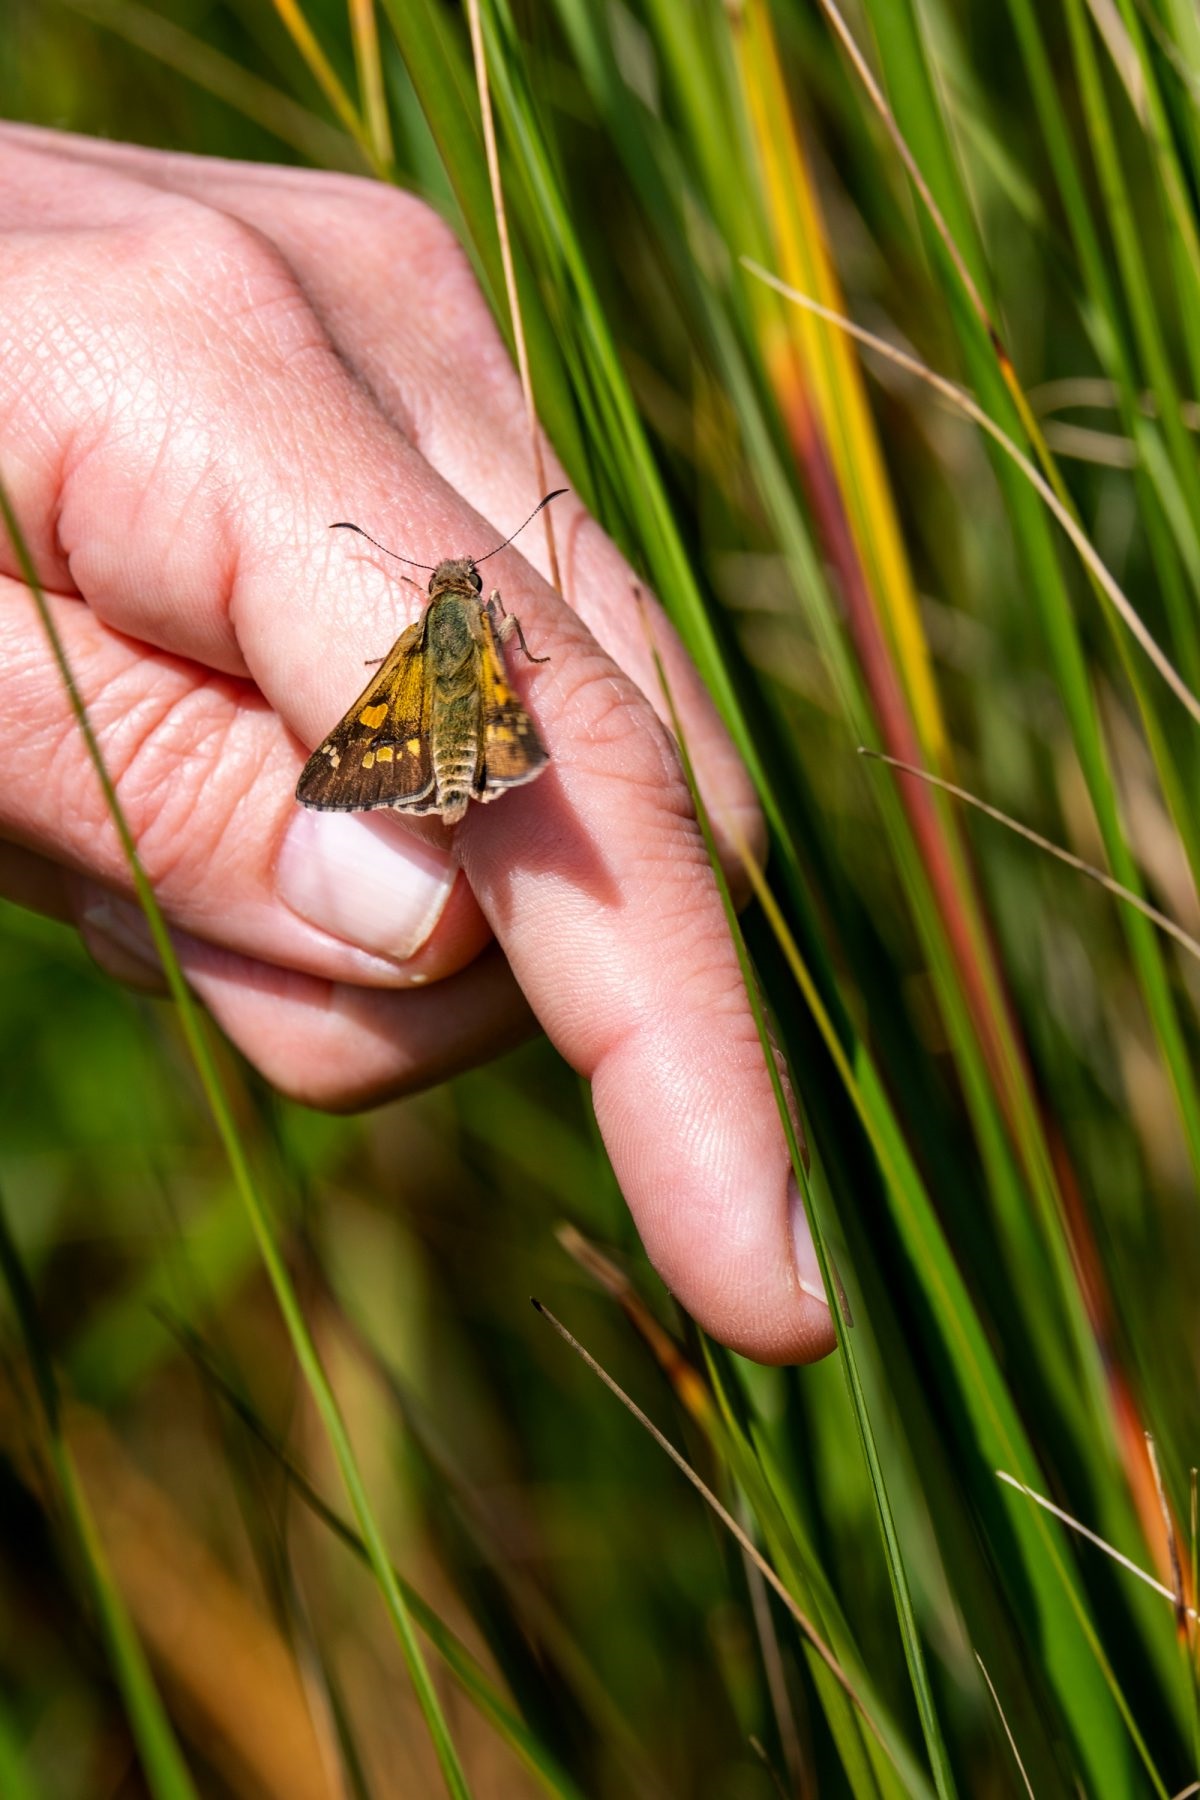 releasing a new brood of Yellowish Sedge Skipper butterfly pupae to repopulate the species